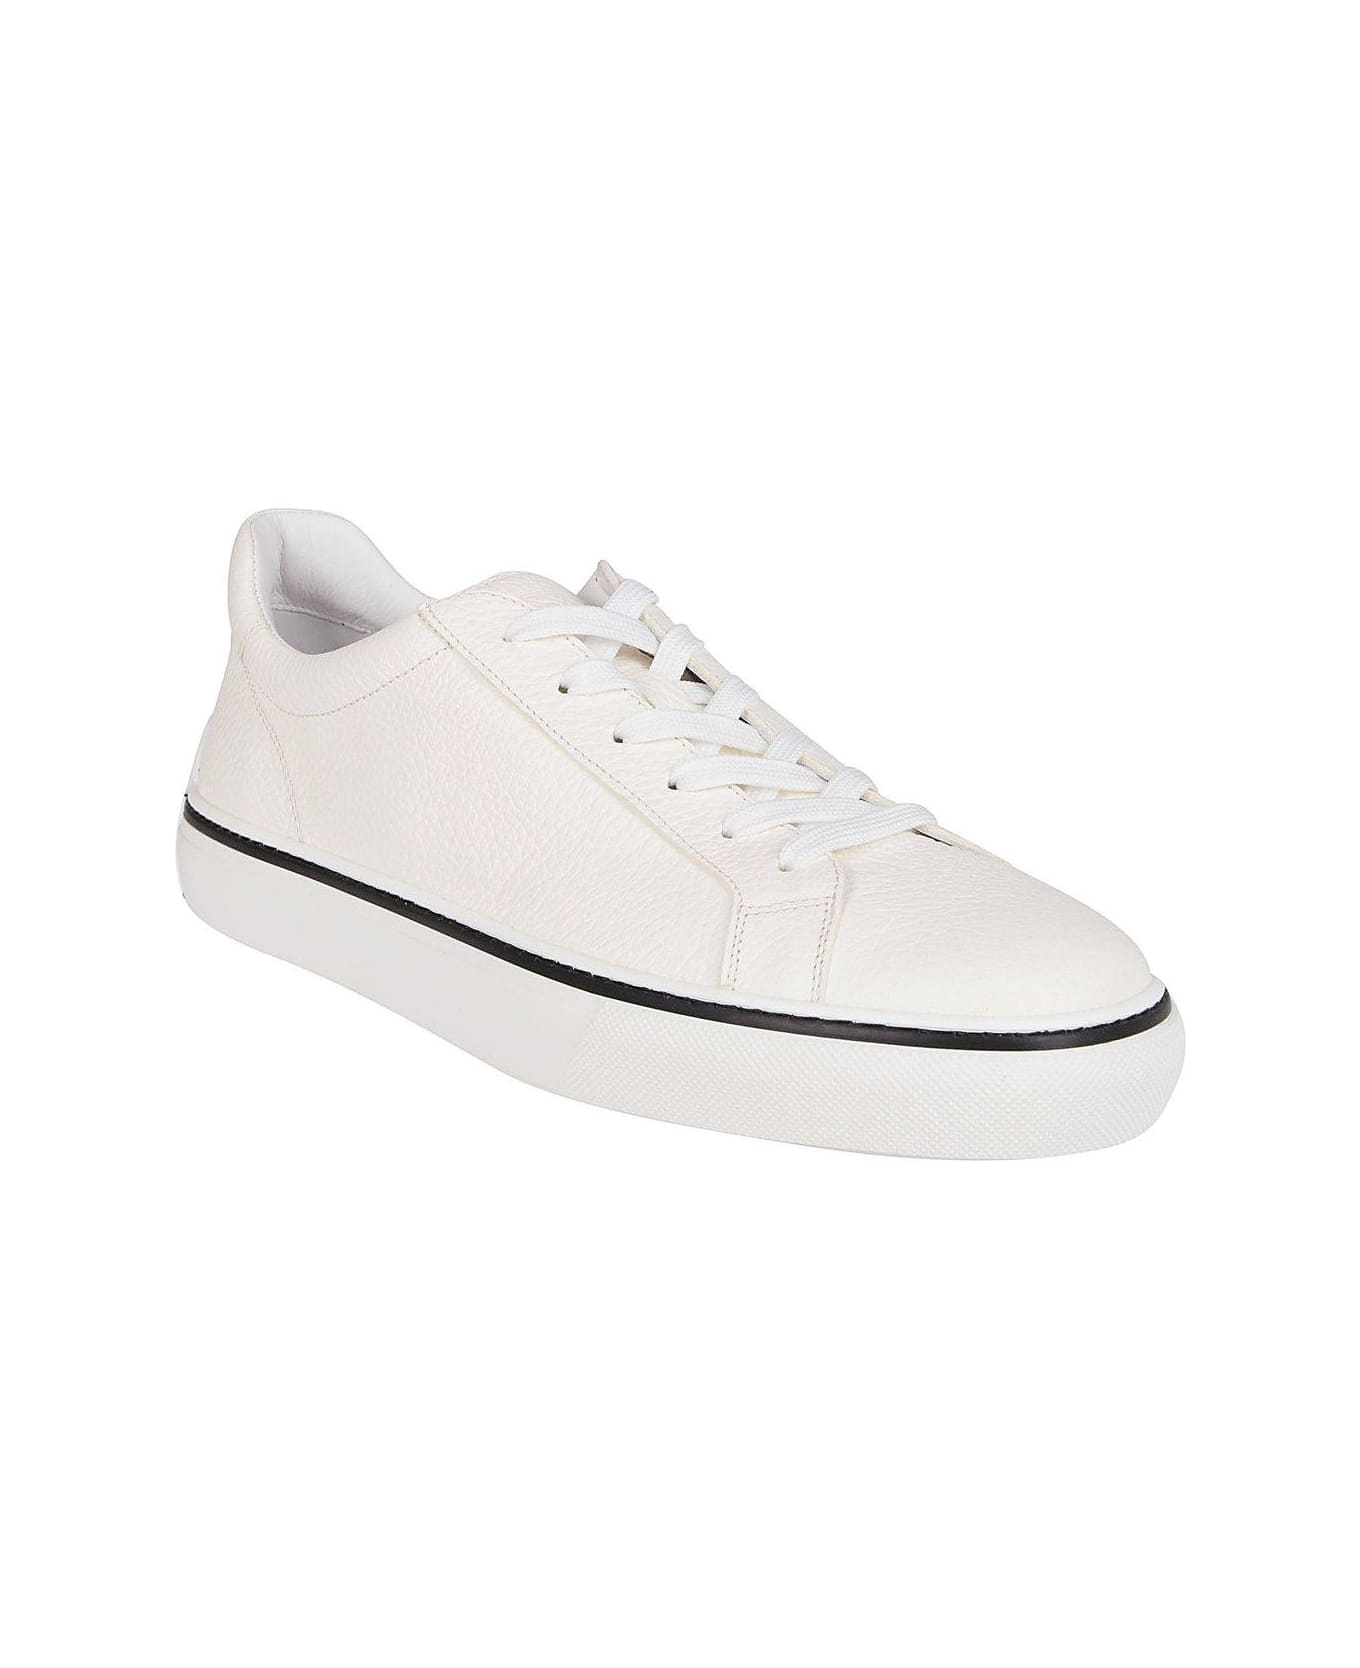 Tod's Contrasting Stripe Low-top Sneakers - White